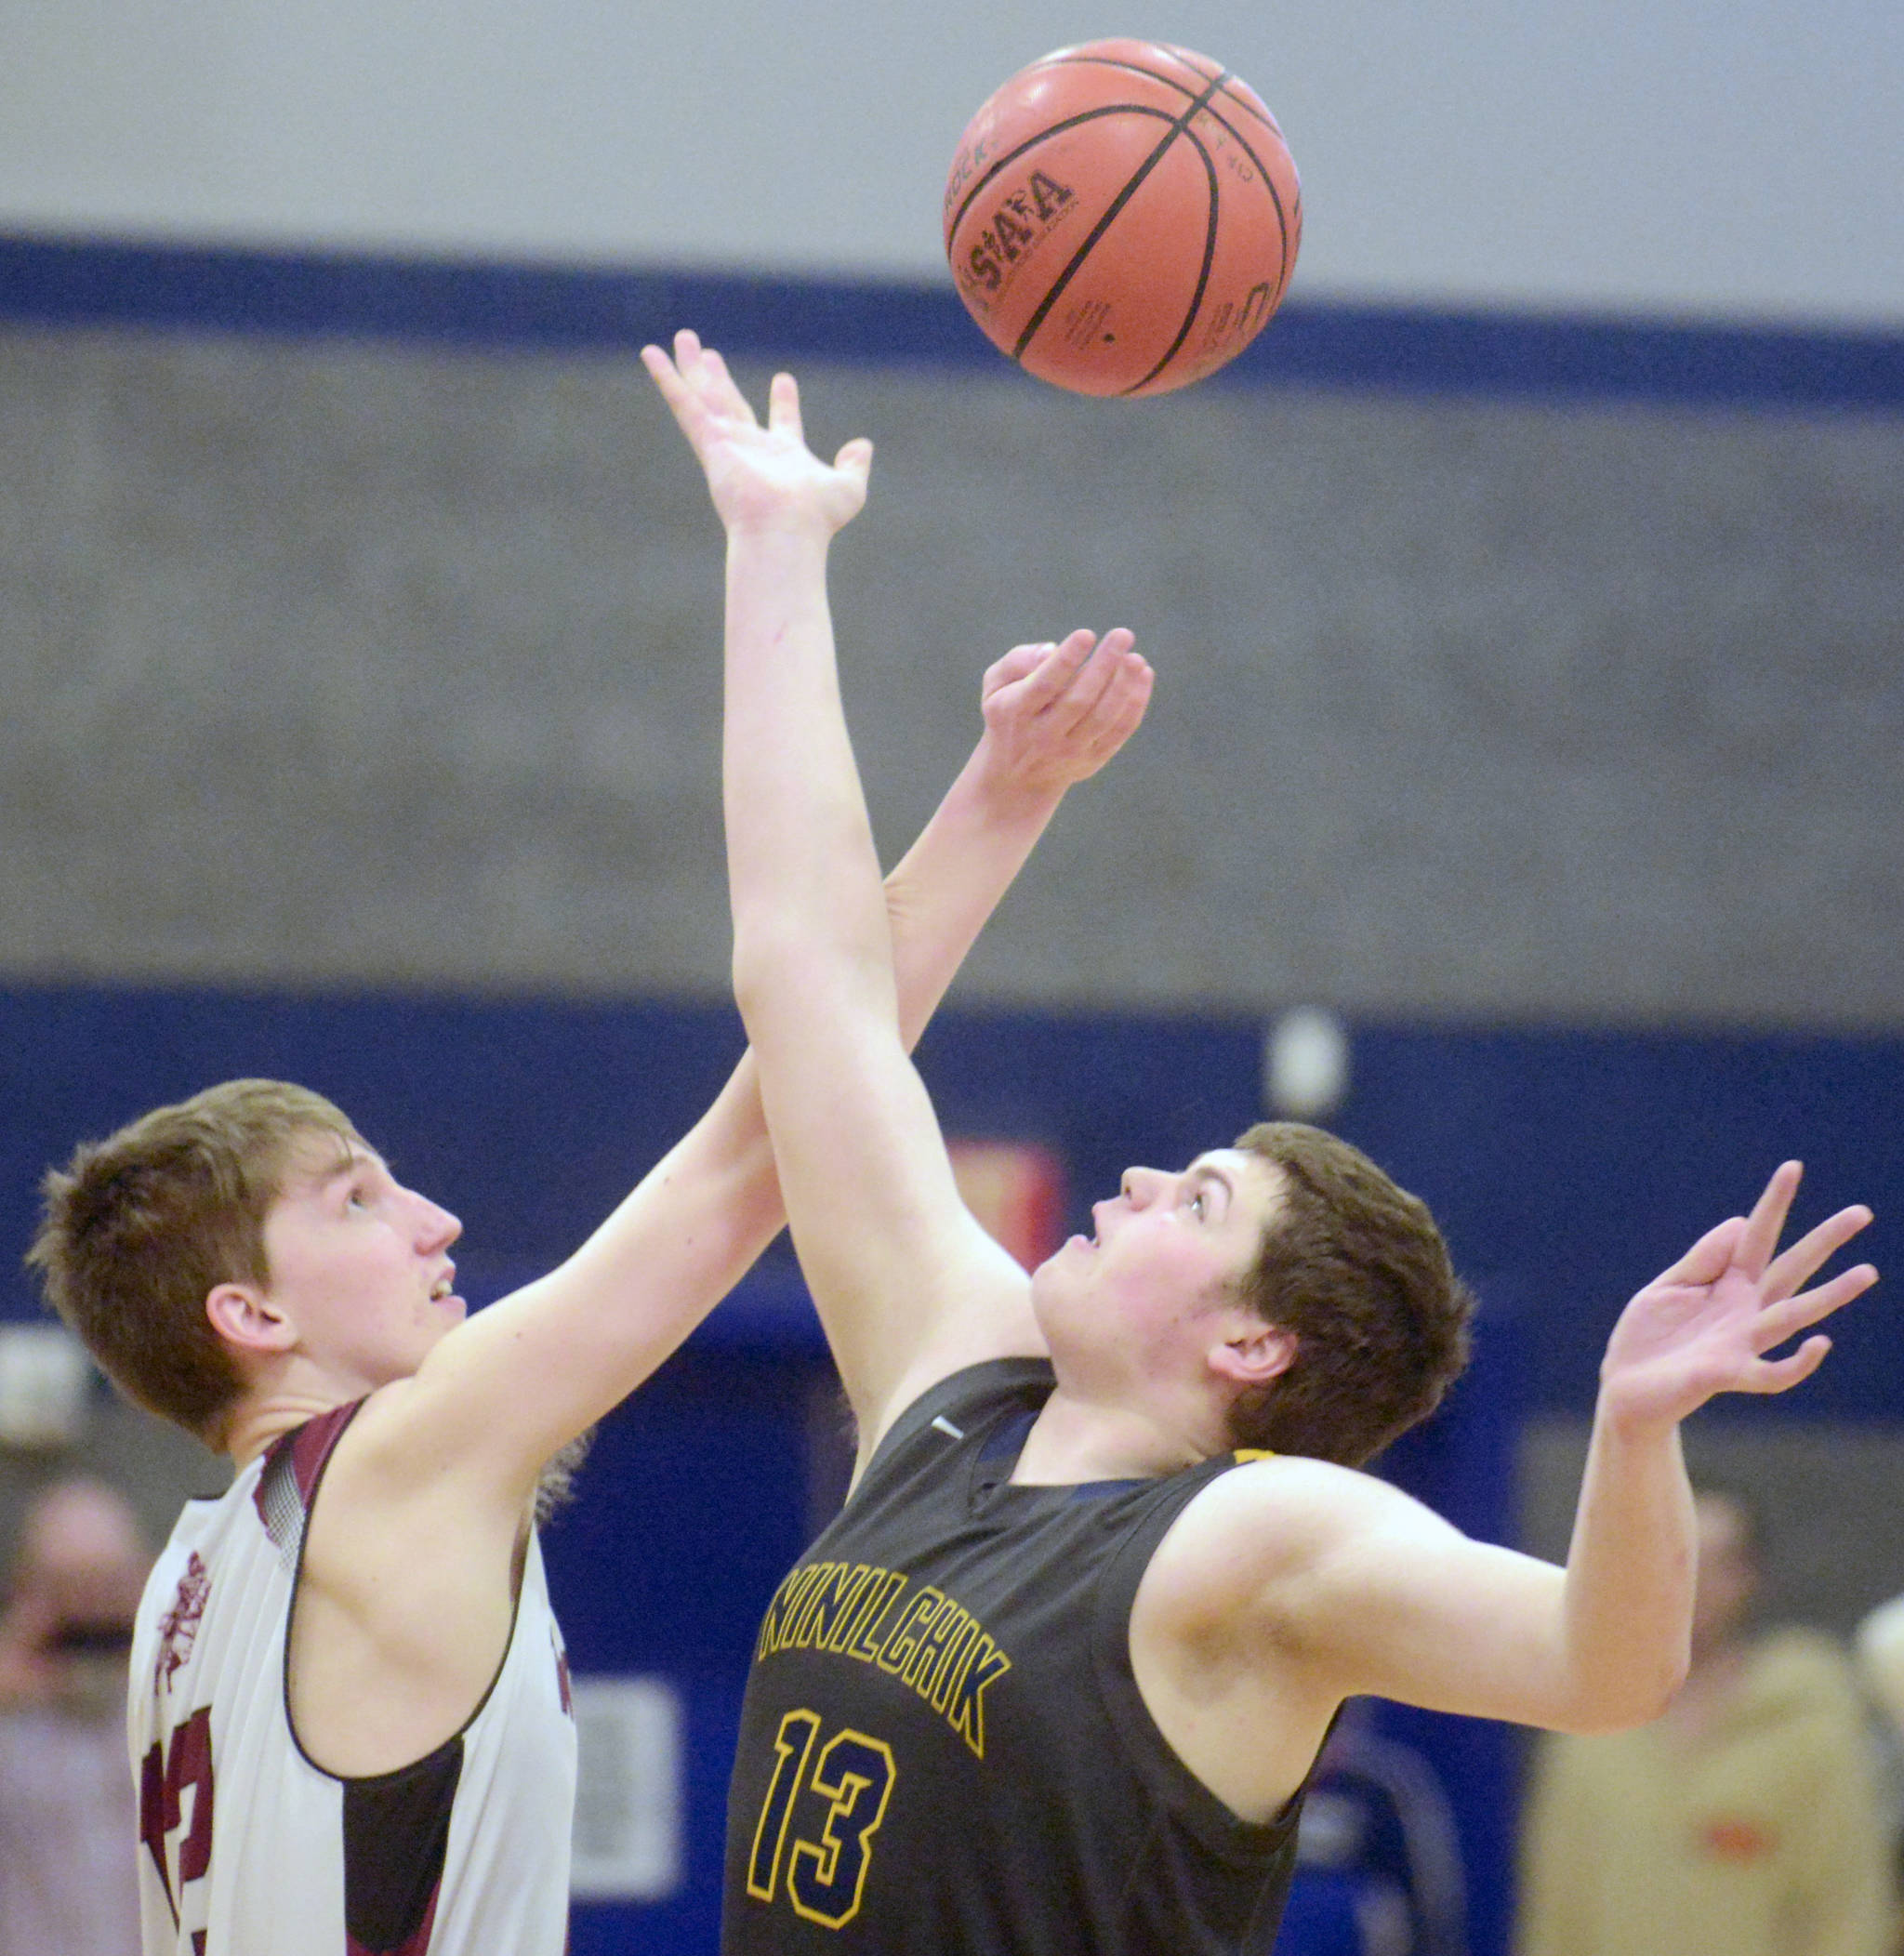 Nikolaevsk’s Kosta Nikitenko and Ninilchik’s Jake Clark battle for the opening tip Friday in the Peninsula Conference championship game at Cook Inlet Academy in Soldotna. (Photo by Jeff Helminiak/Peninsula Clarion)